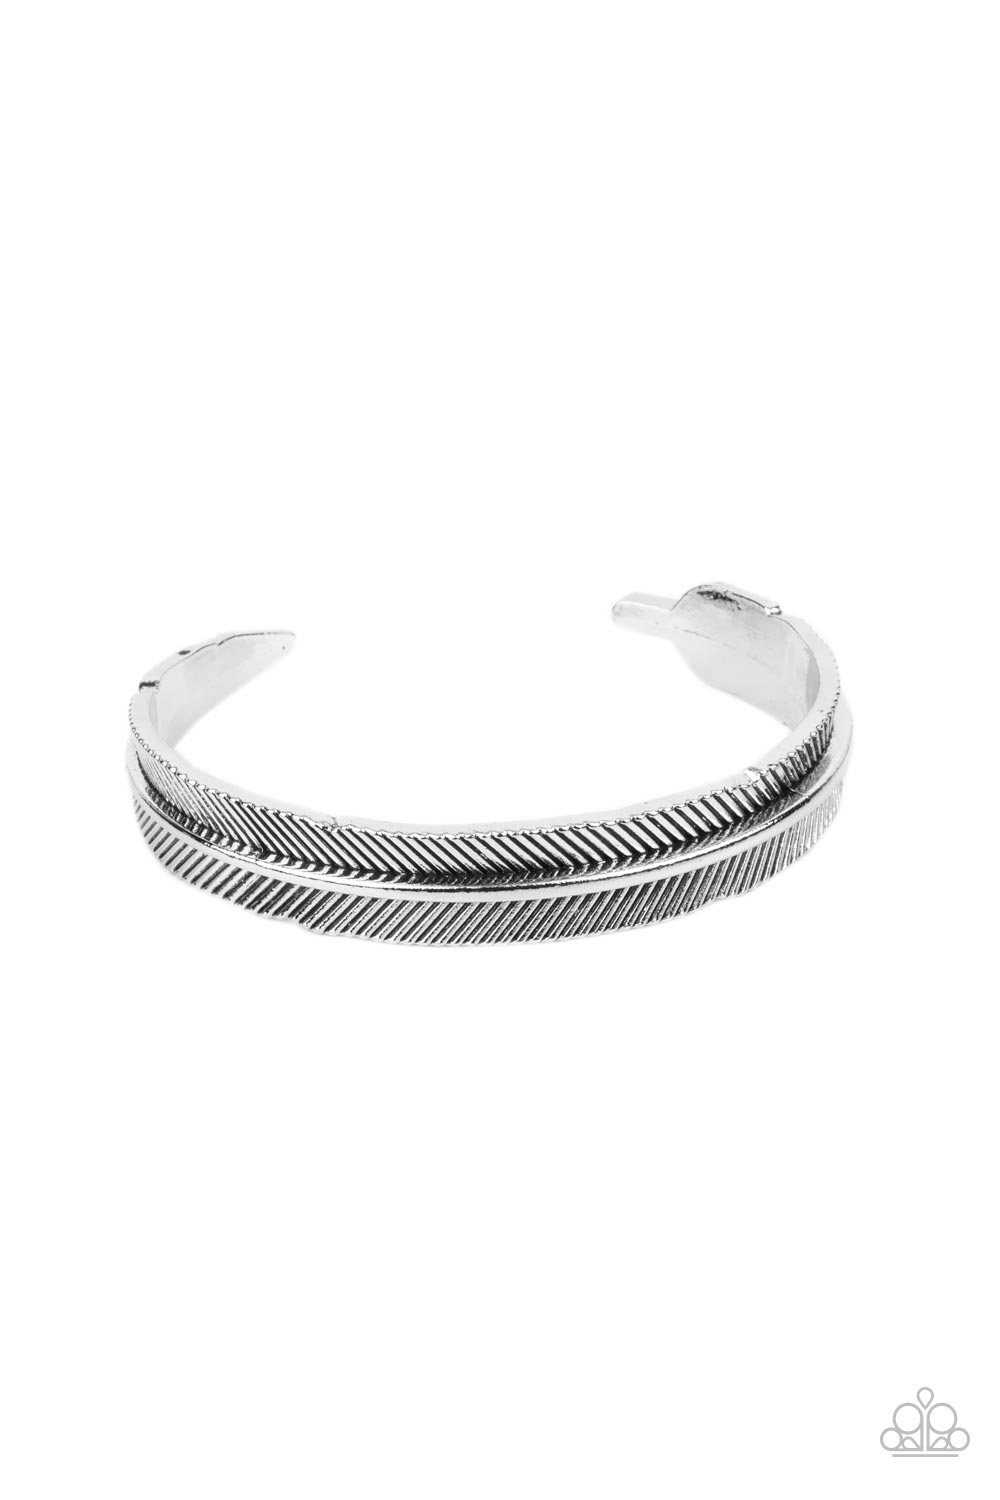 QUILL-Call - silver - Paparazzi bracelet